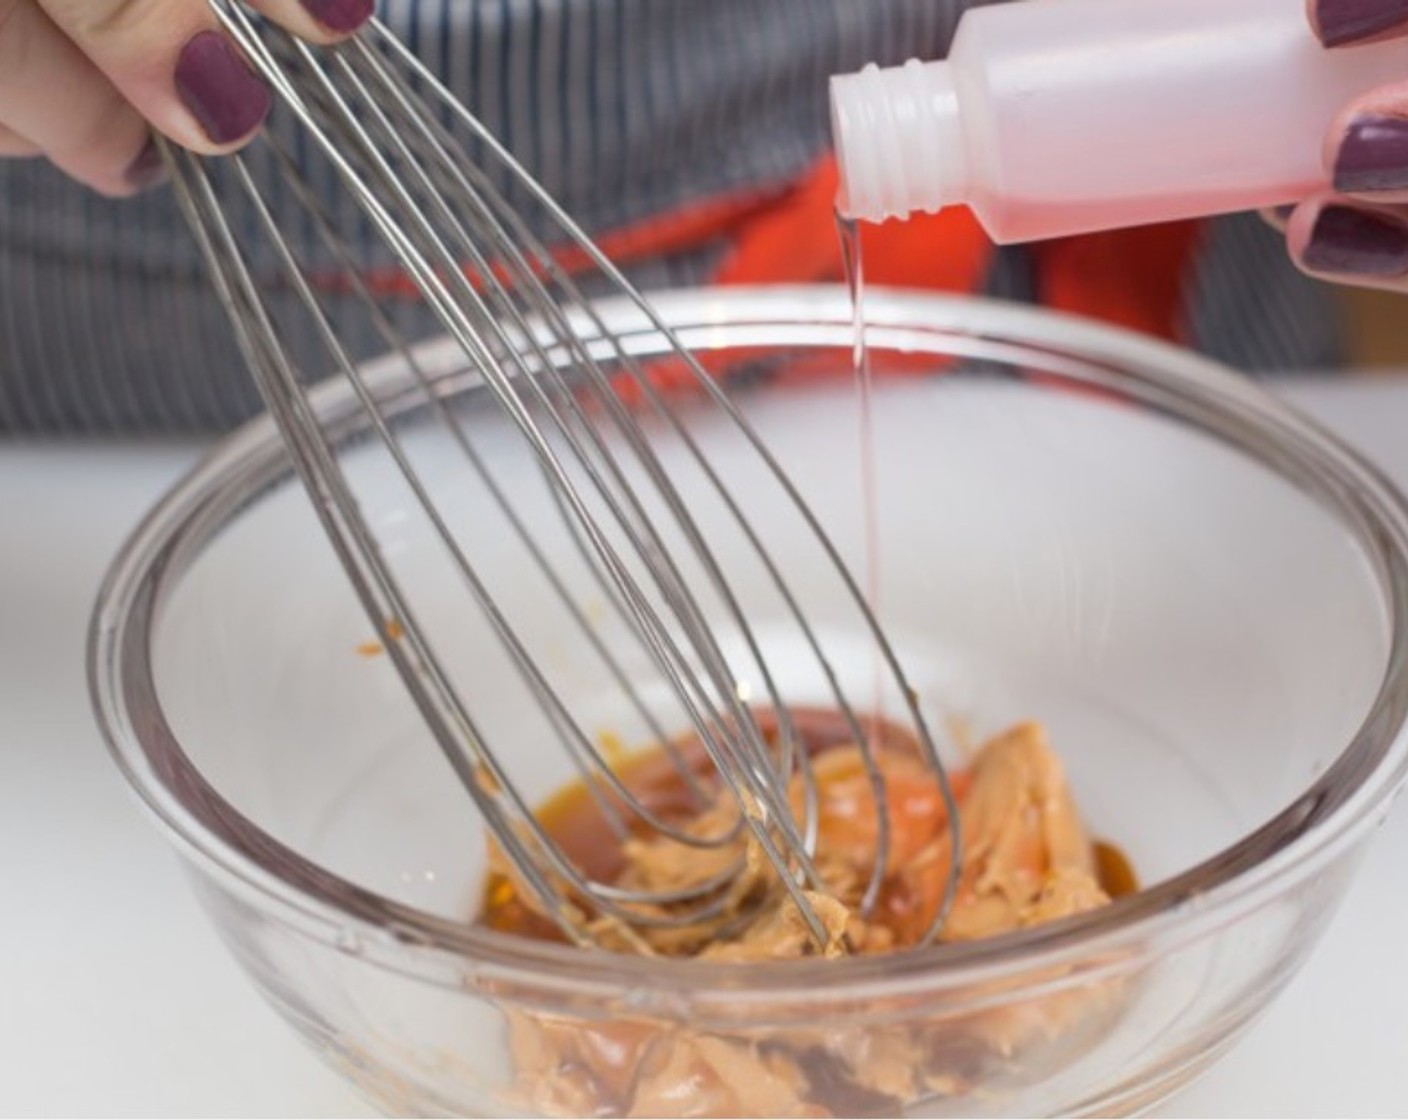 step 9 In a small mixing bowl combine Peanut Butter (1 pckg), 2 Tbsp of water, remaining Olive Oil (1/2 Tbsp), and Red Wine Vinegar (1/2 Tbsp). Whisk to mix thoroughly and emulsify.